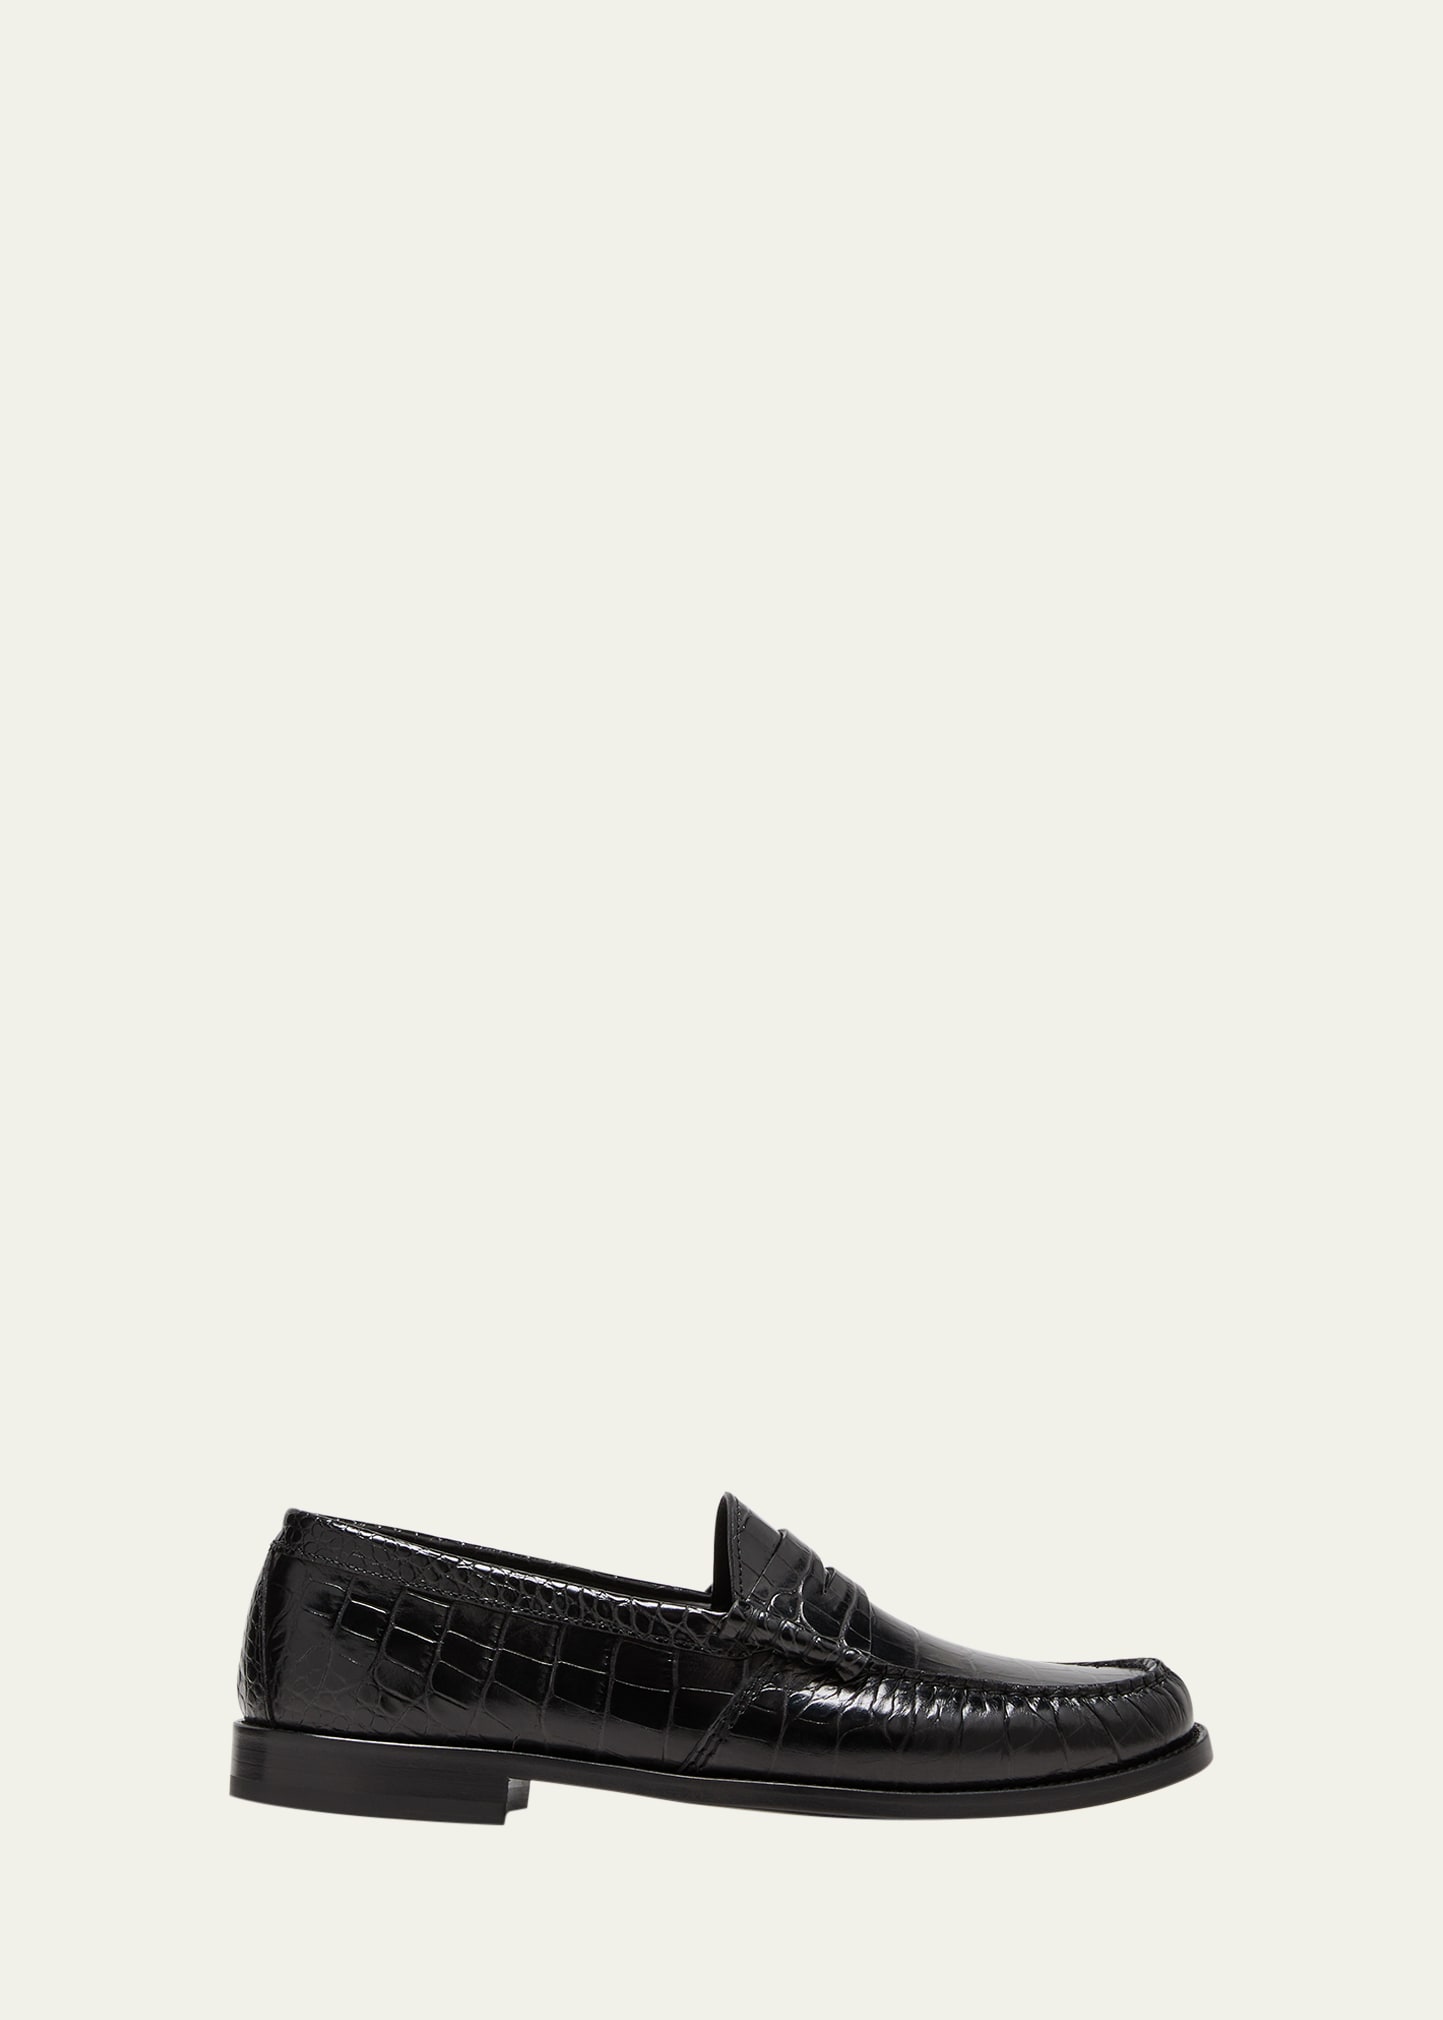 RHUDE MEN'S CROC-EFFECT LEATHER PENNY LOAFERS